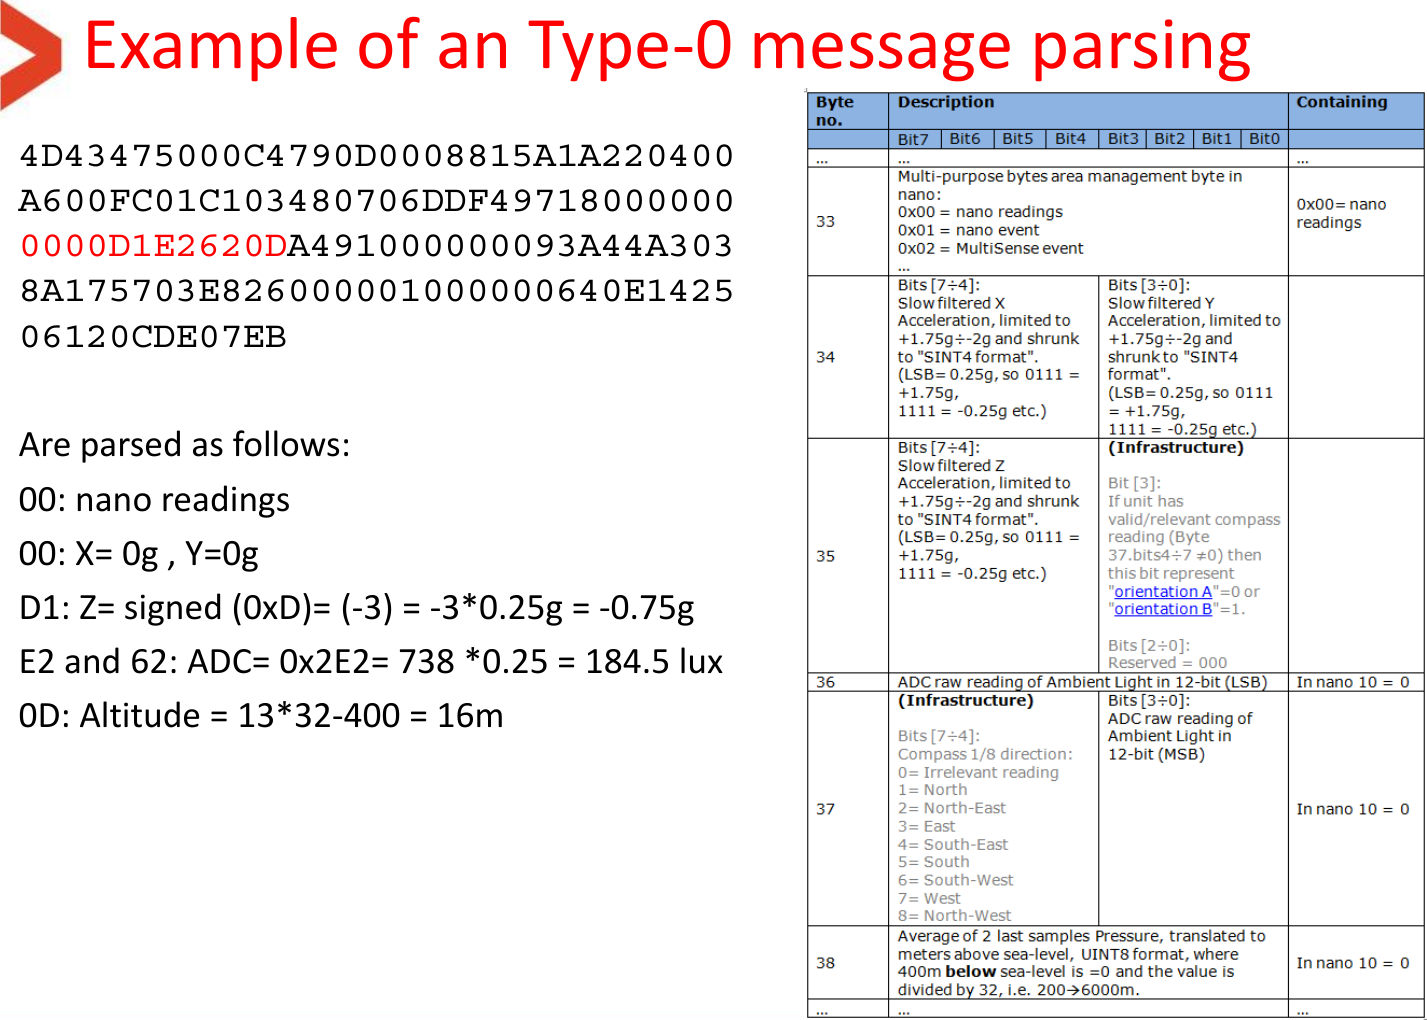 Example of an Type-0 message parsing  4D43475000C4790D0008815A1A220400A600FC01C103480706DDF497180000000000D1E2620DA491000000093A44A3038A175703E826000001000000640E142506120CDE07EB  Are parsed as follows: 00: nano readings 00: X= 0g , Y=0g D1: Z= signed (0xD)= (-3) = -3*0.25g = -0.75g E2 and 62: ADC= 0x2E2= 738 *0.25 = 184.5 lux 0D: Altitude = 13*32-400 = 16m       